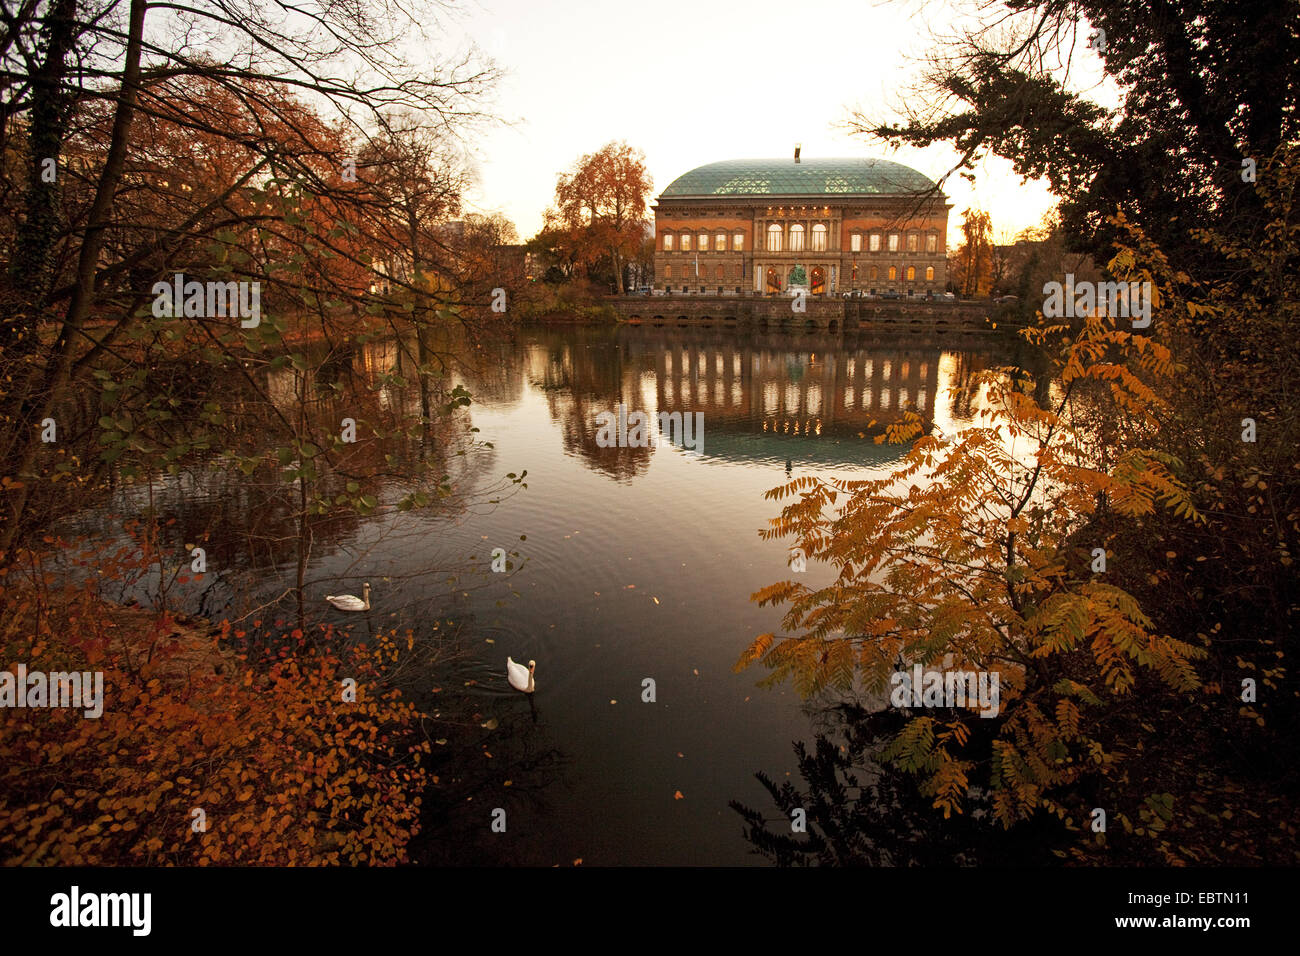 pond and house of the estates K21 in autumn, Germany, North Rhine-Westphalia, Duesseldorf Stock Photo